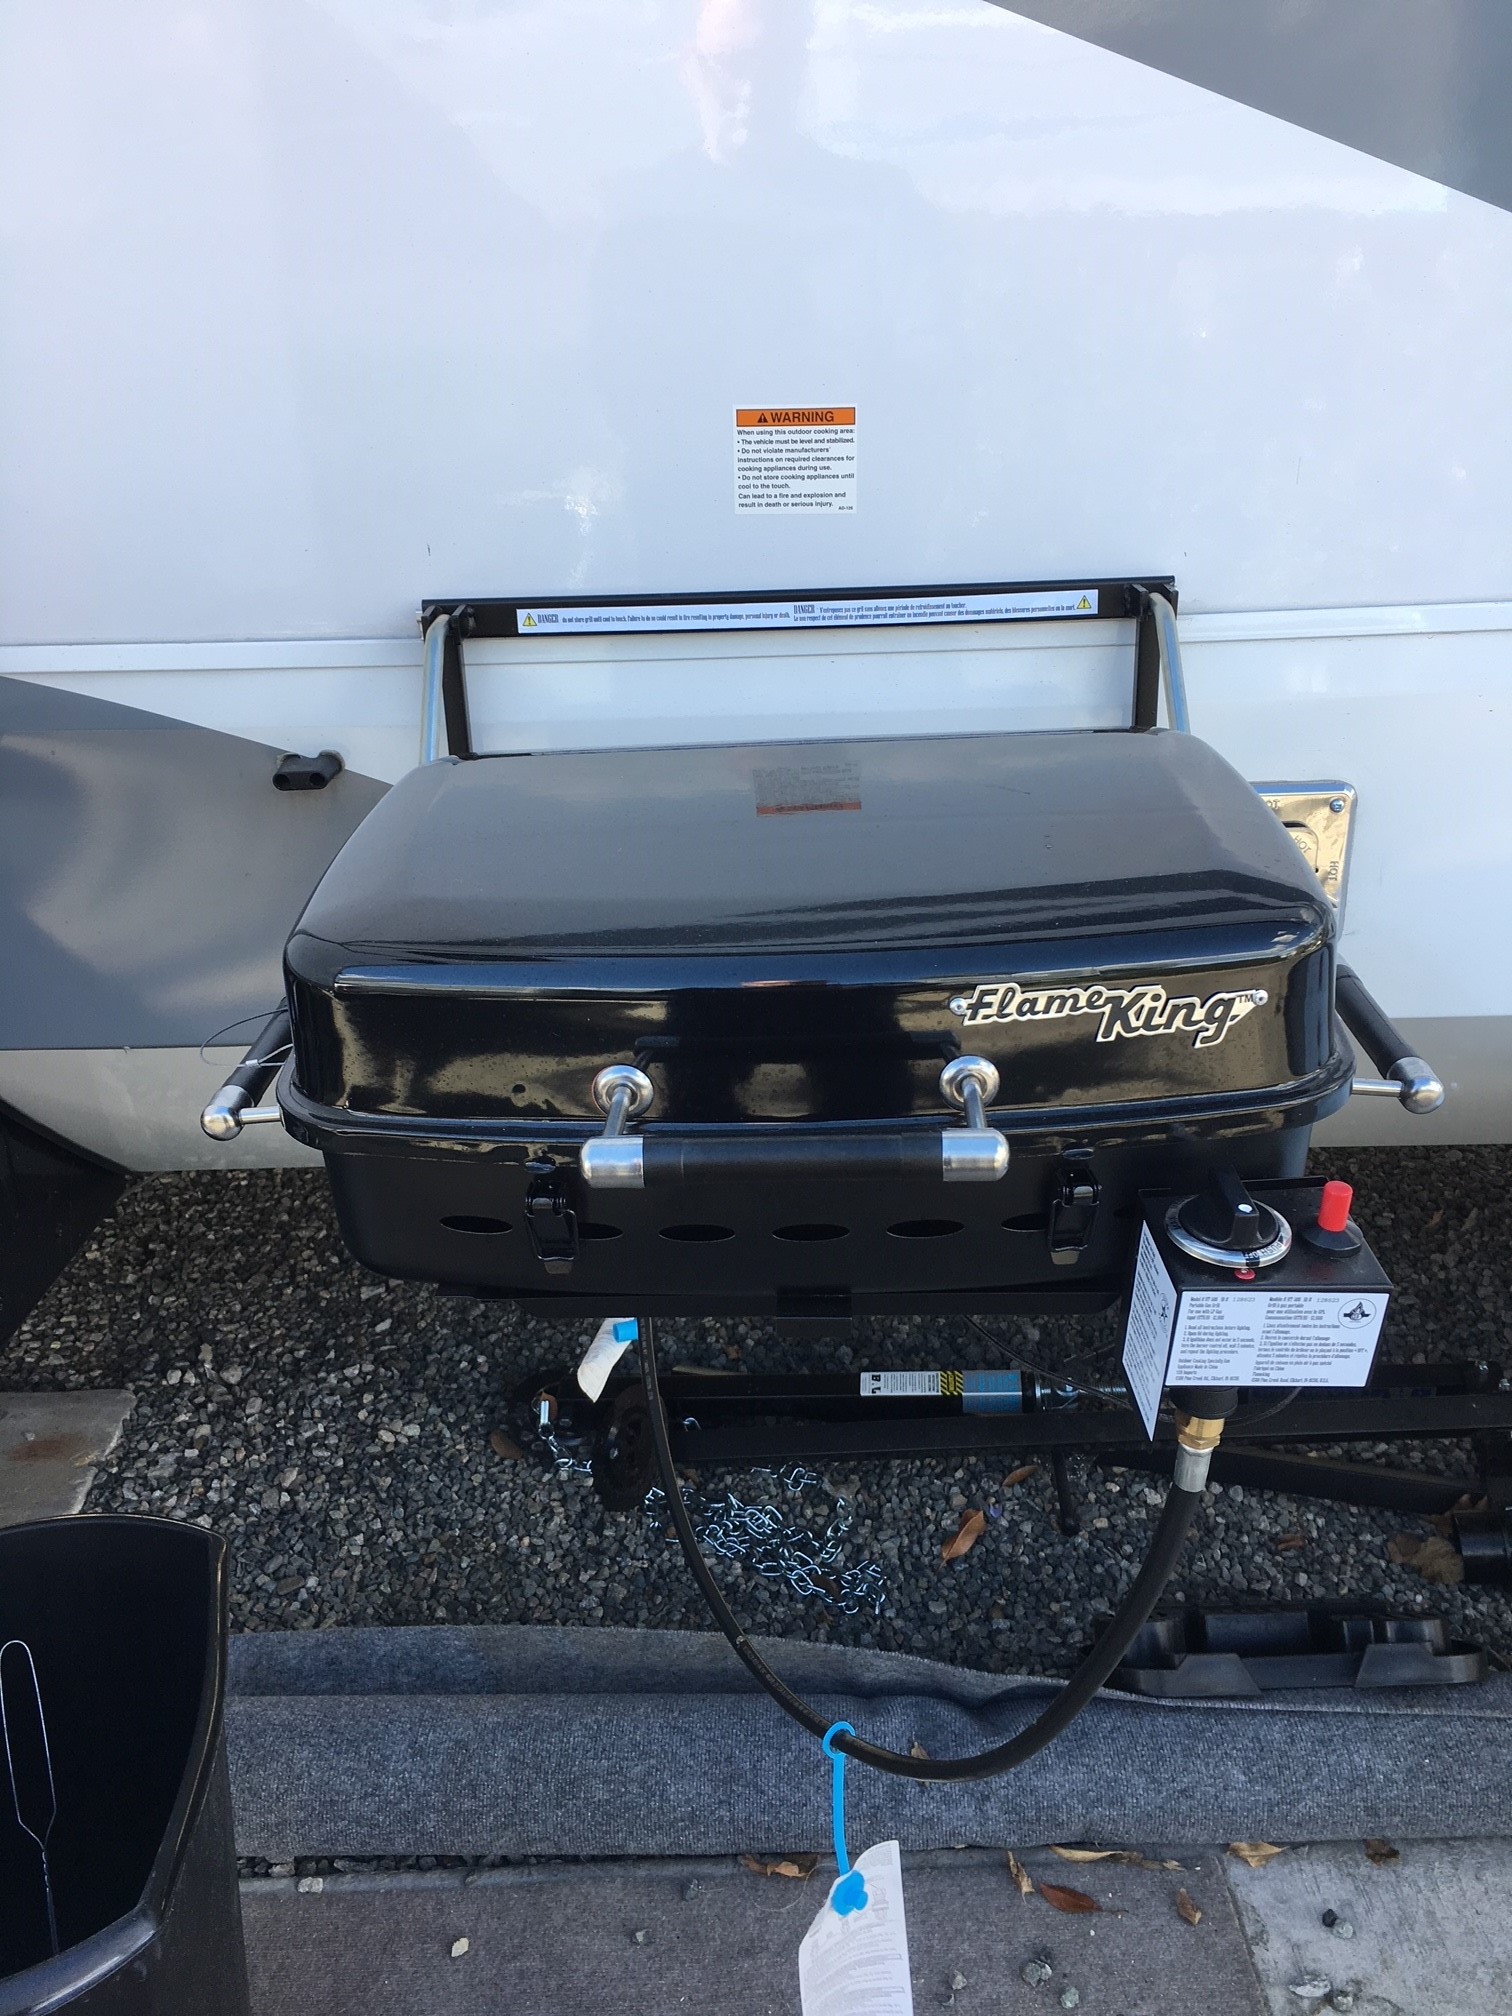 Uncovered RV Grill, posing risk to vehicle